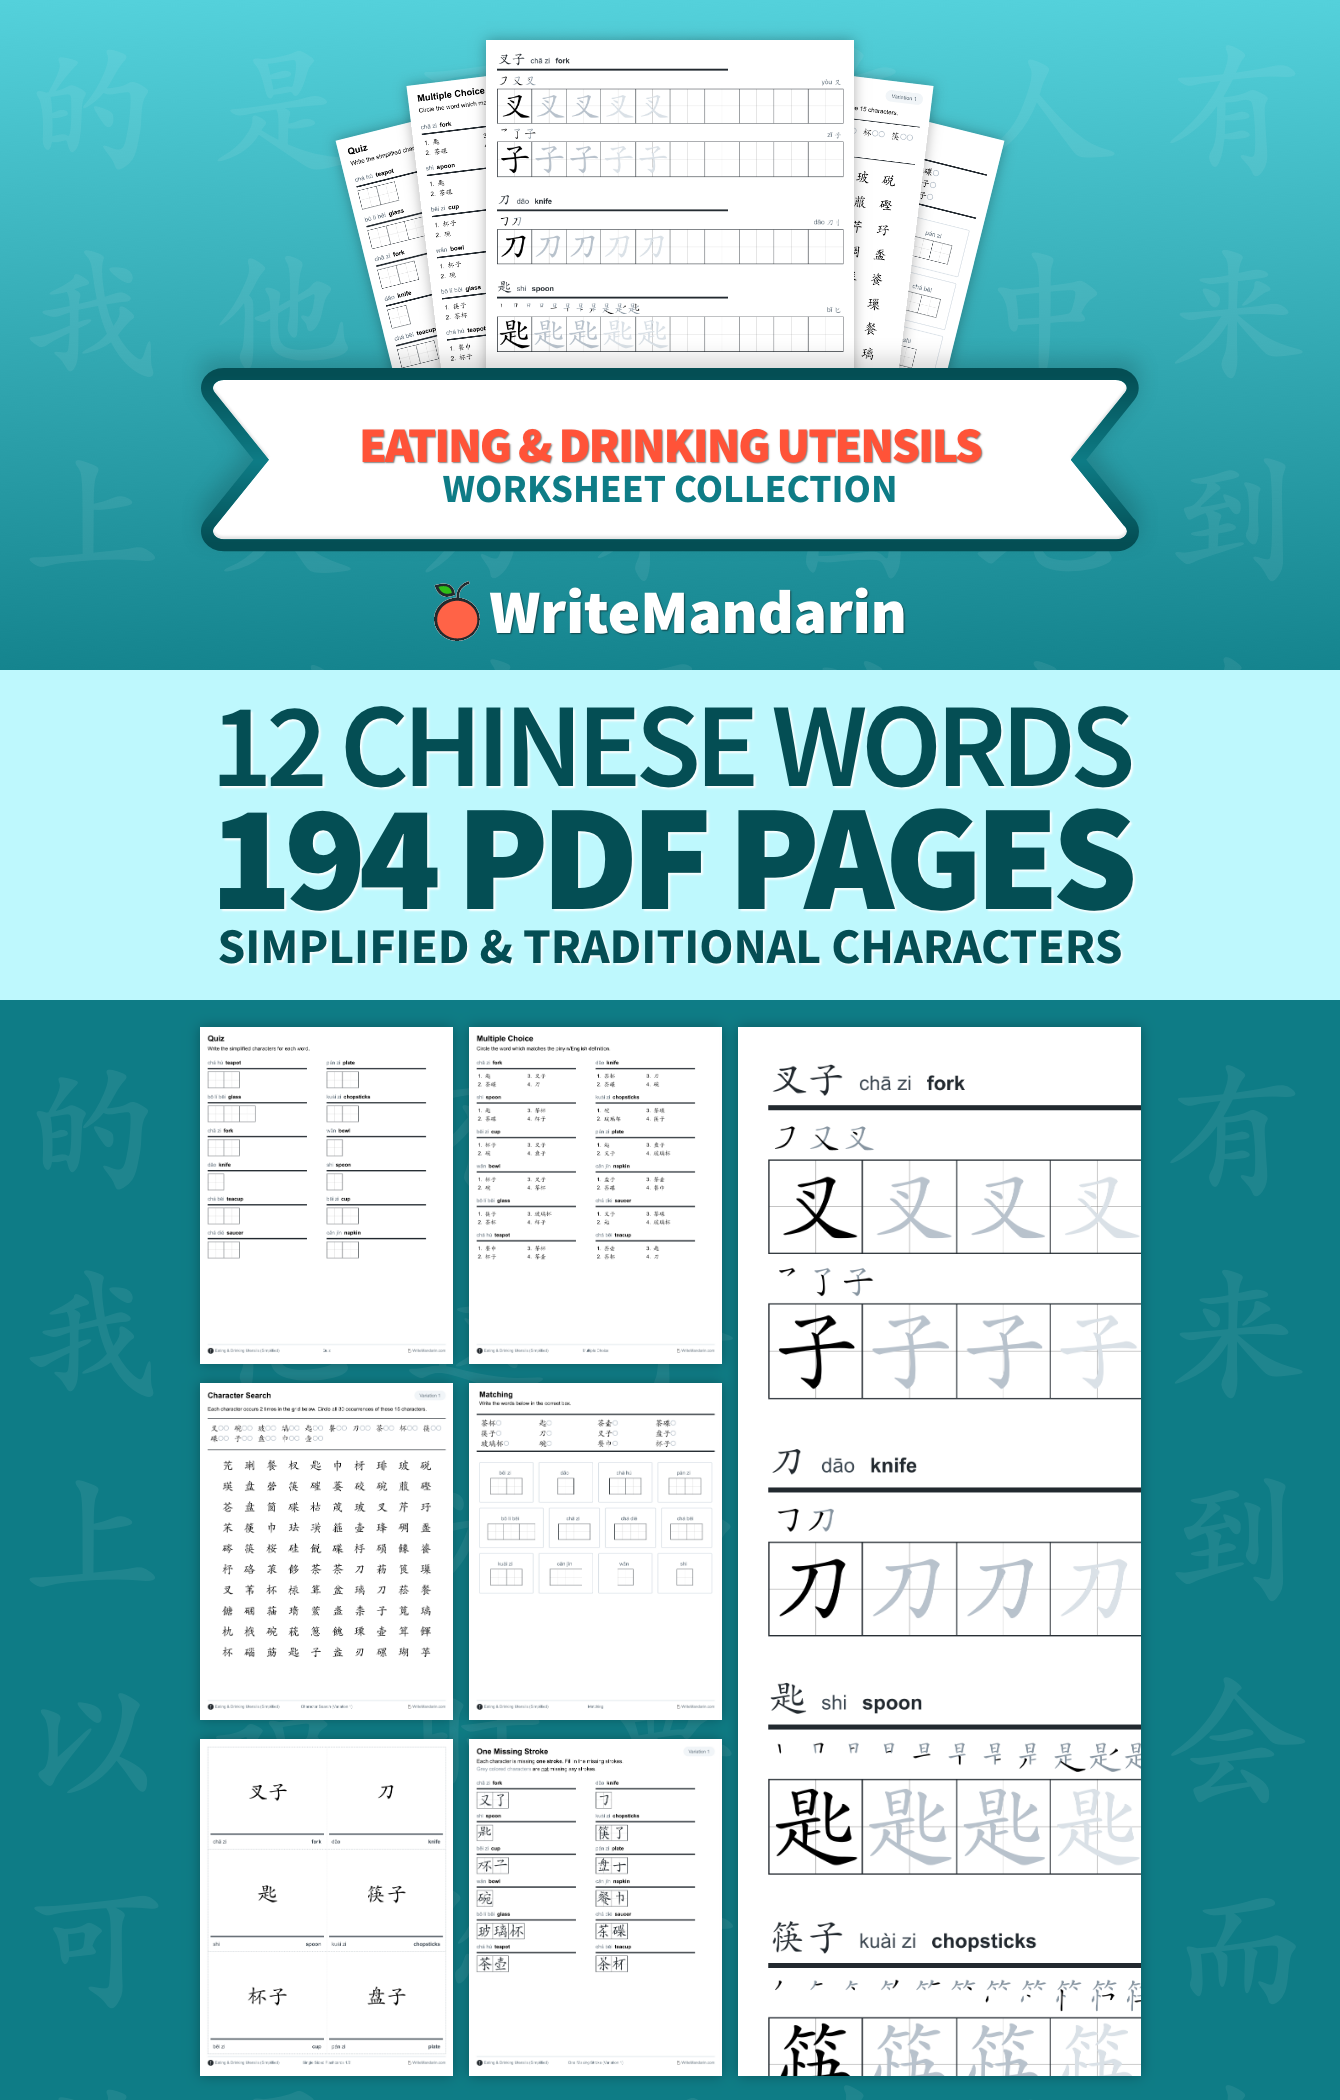 Preview image of Eating & Drinking Utensils worksheet collection